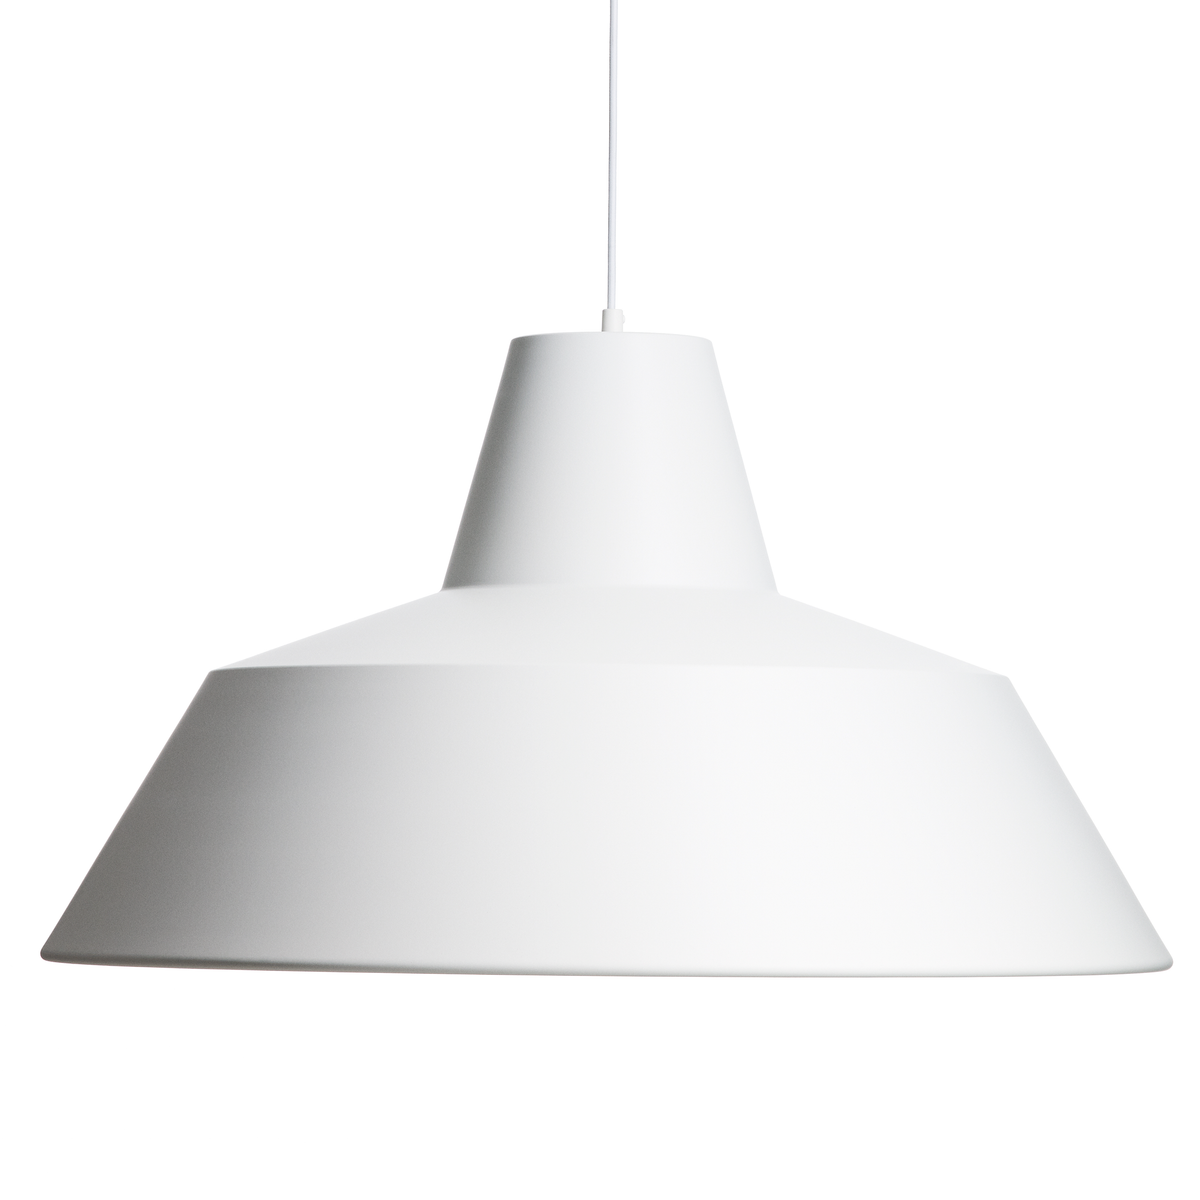 Made by Hand, Workshop Pendant Lamp W5, Matte White, Pendant, A. Wedel-Madsen,